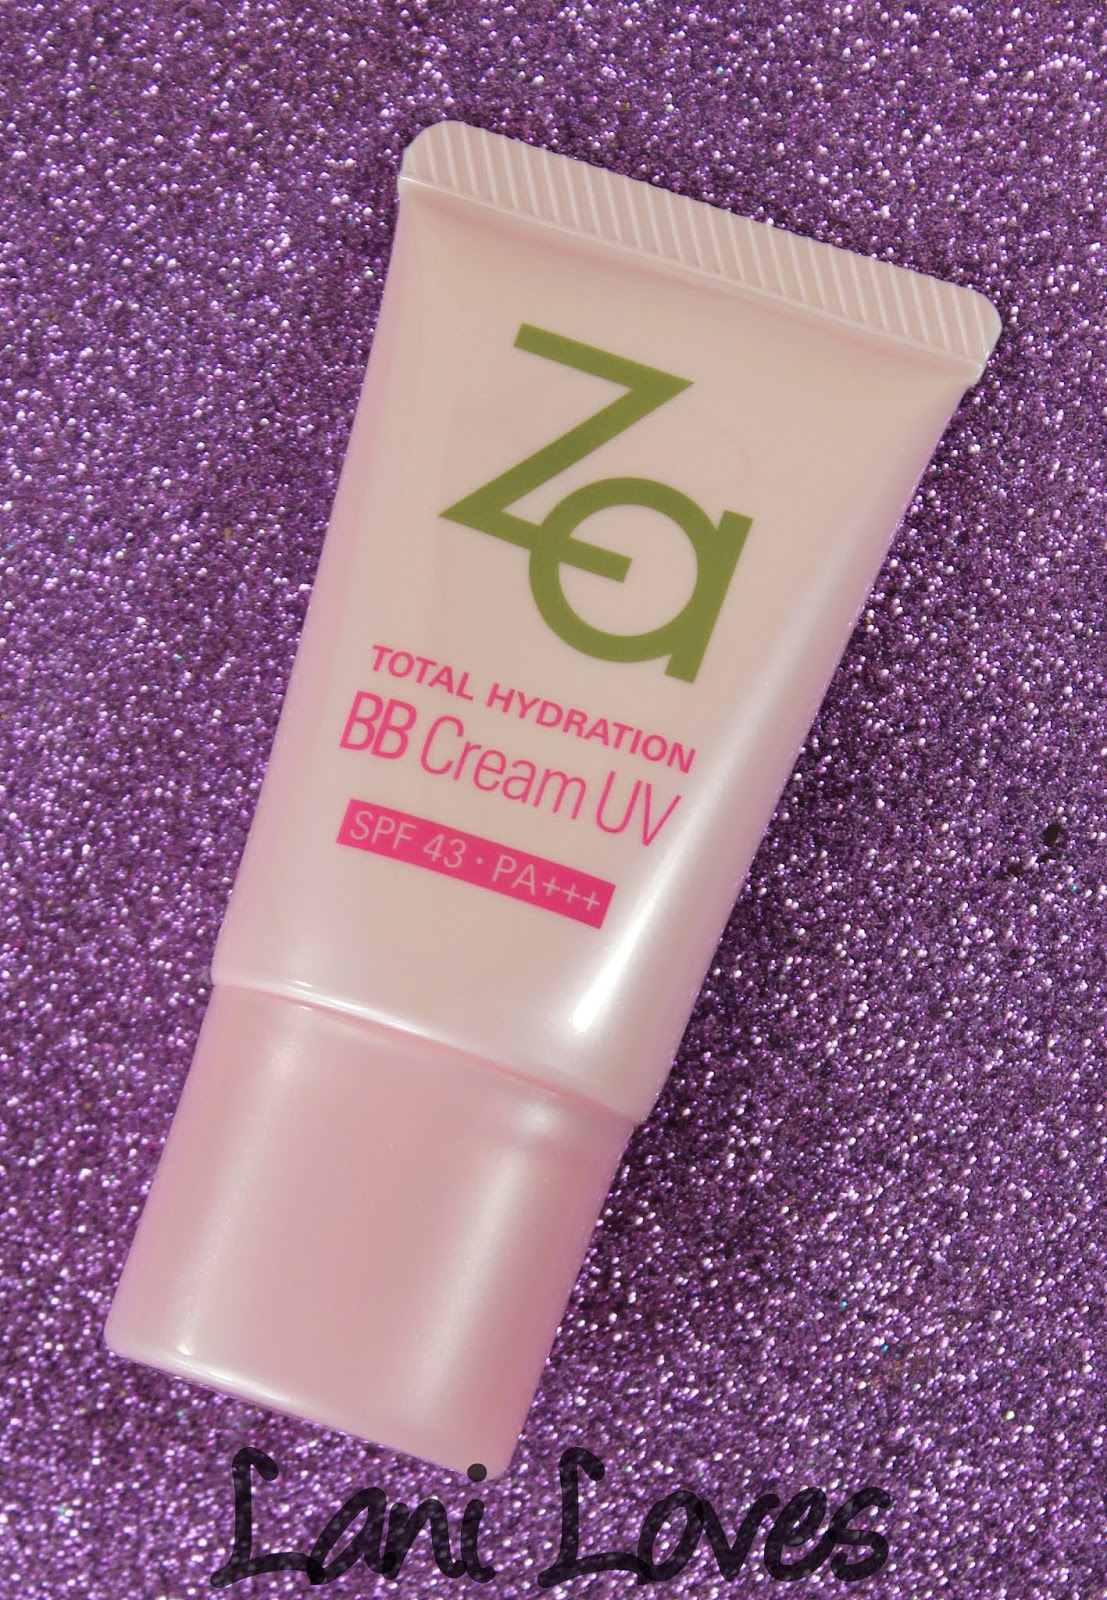 ZA Total Hydration BB Cream UV Swatches & Review - Lani Loves